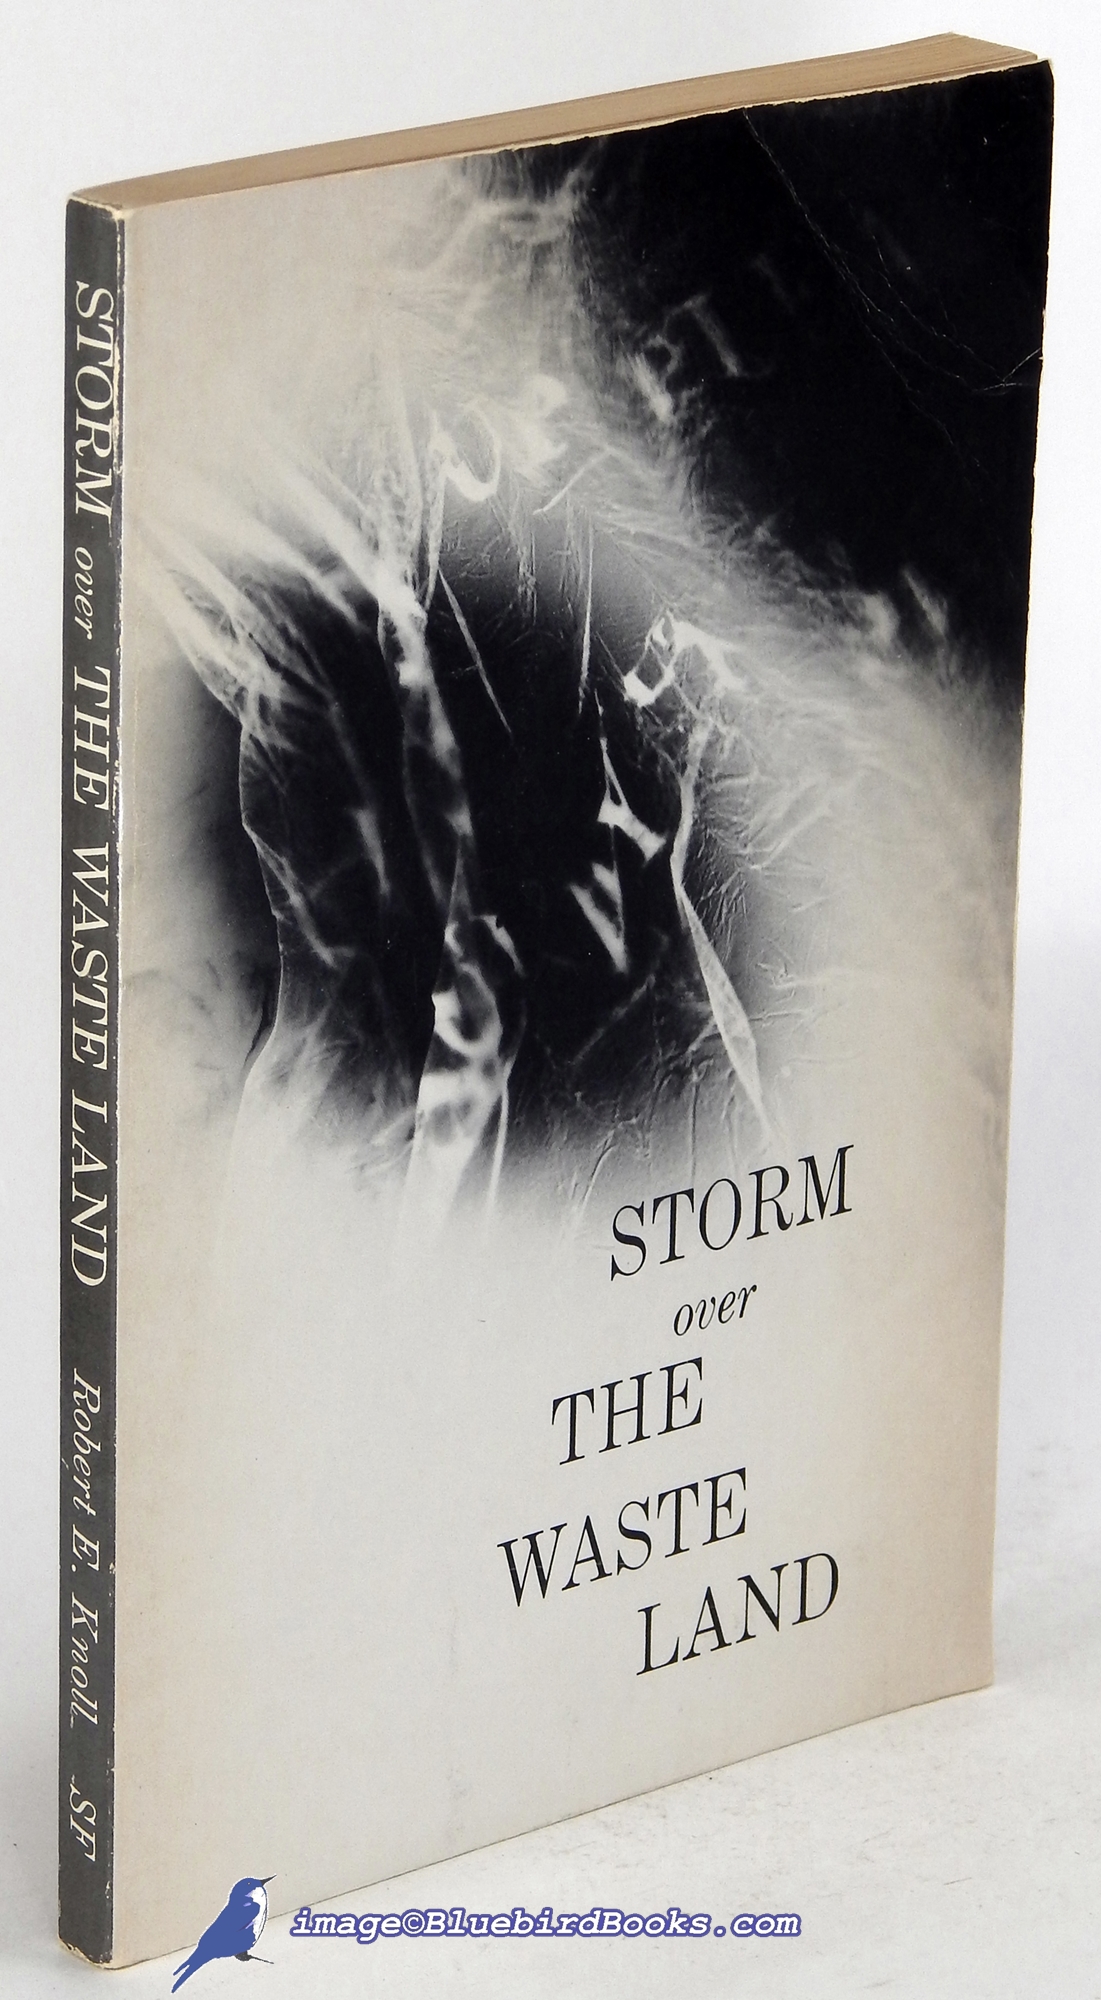 KNOLL, ROBERT E. - Storm over the Waste Land